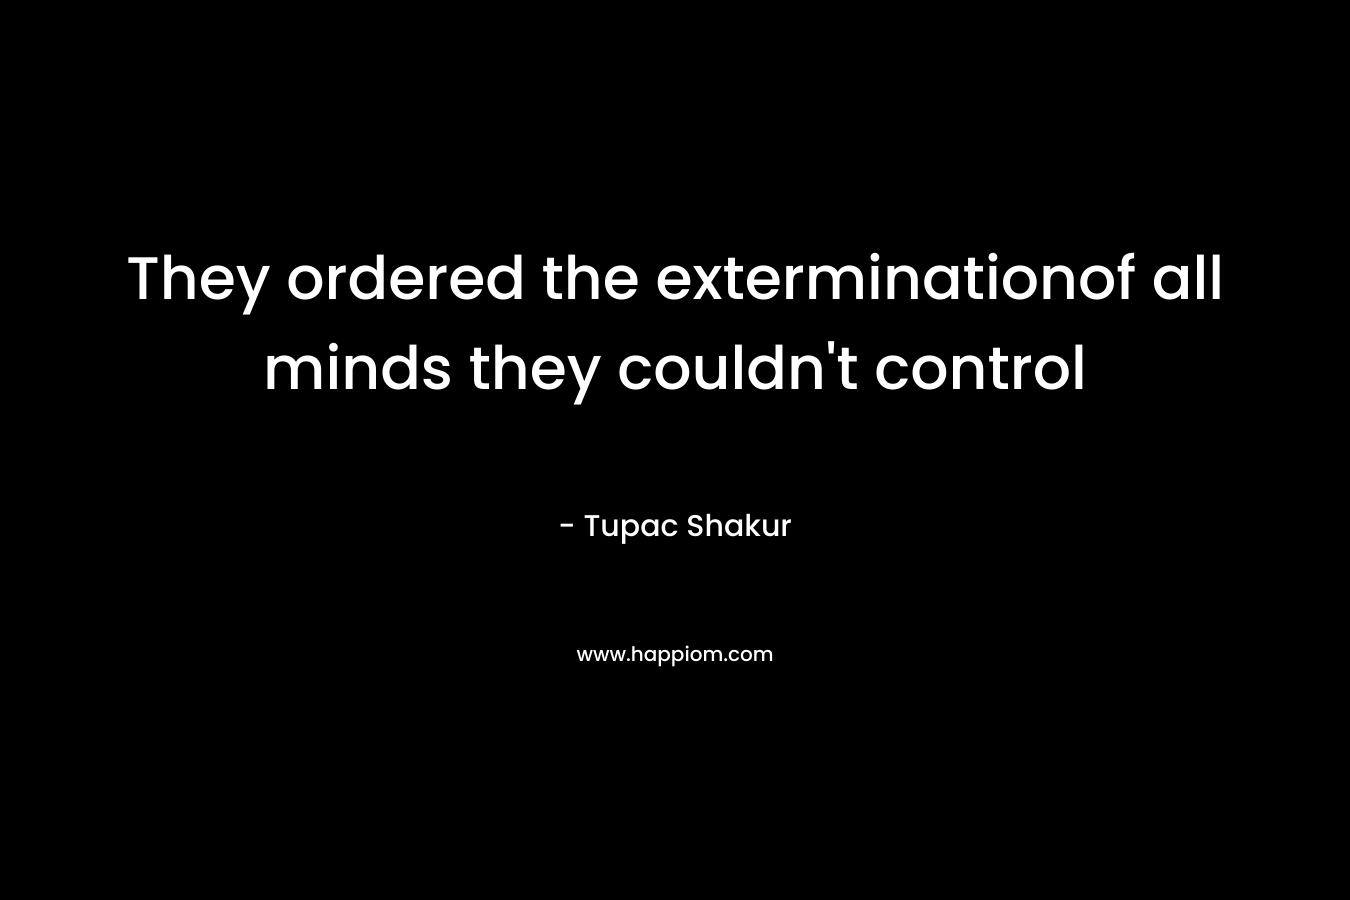 They ordered the exterminationof all minds they couldn’t control – Tupac Shakur